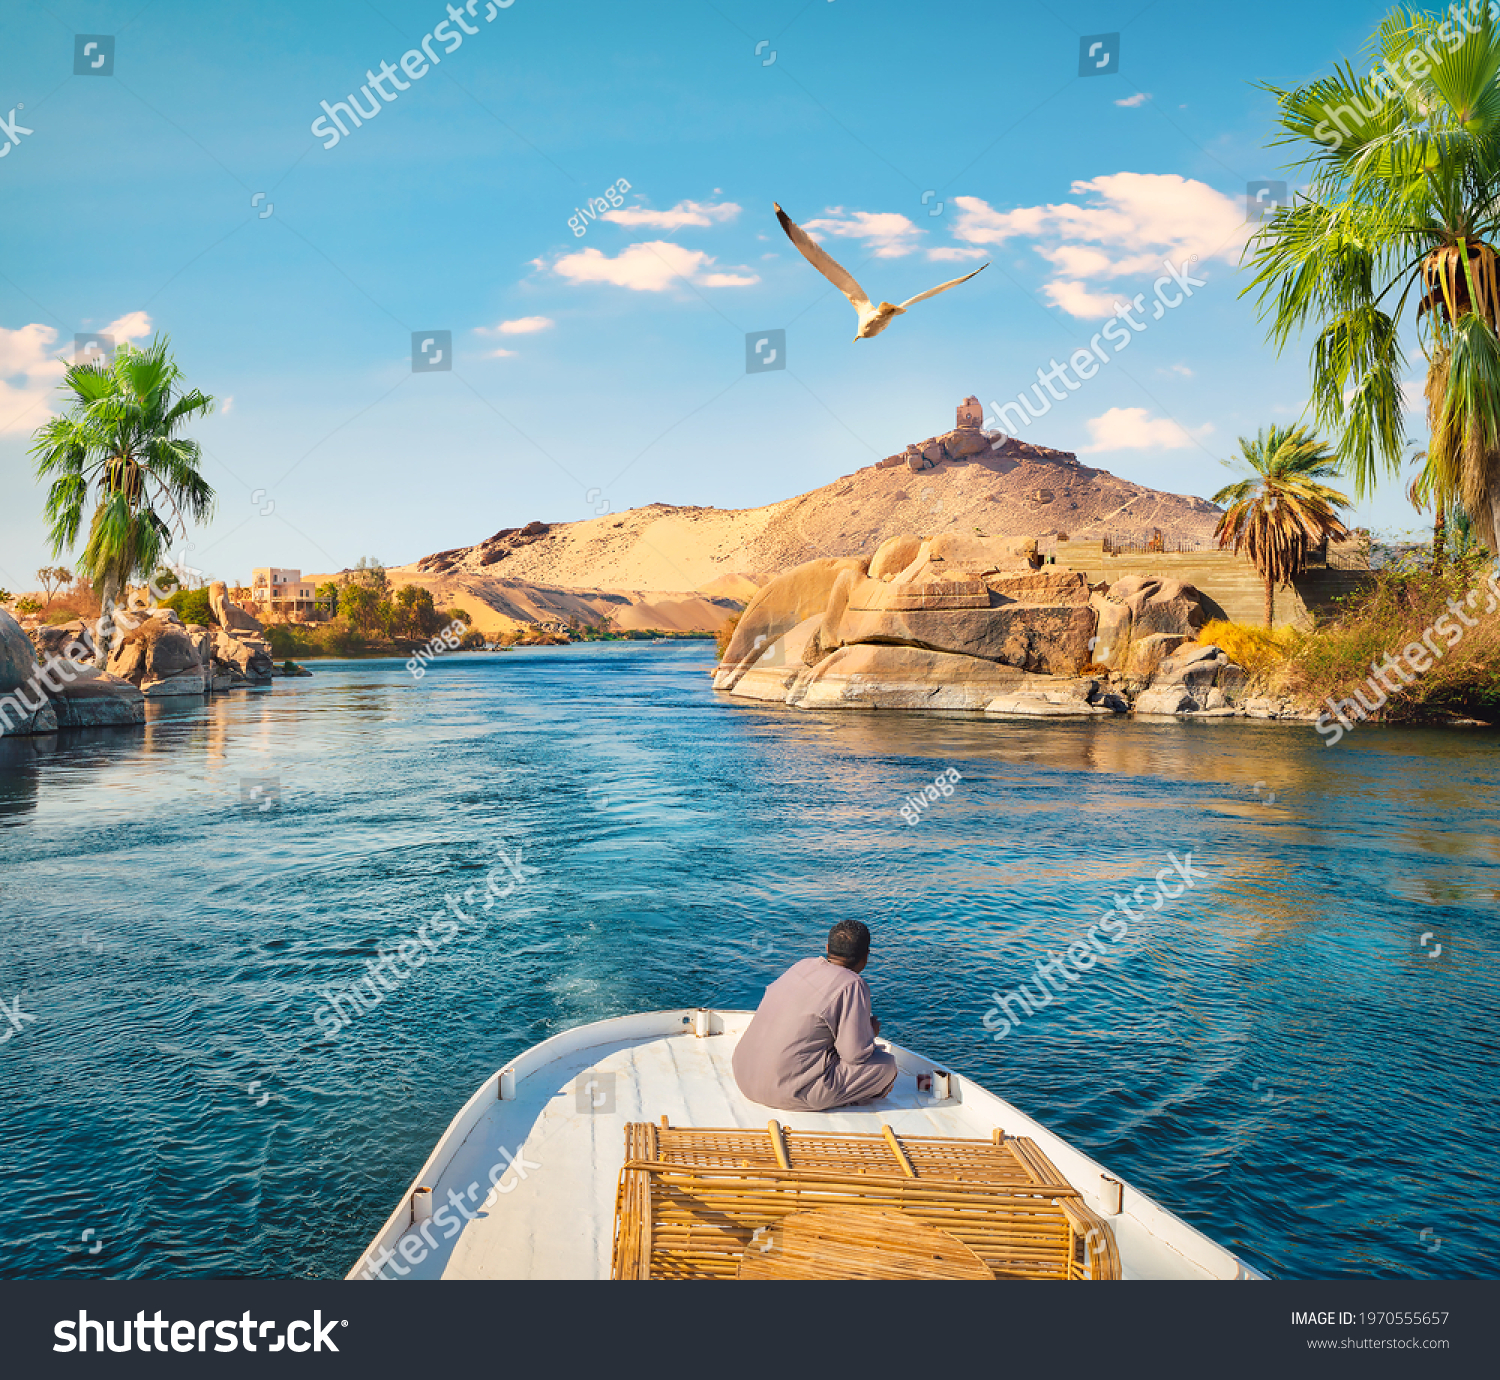 Boat driving on river Nile in Aswan, Egypt #1970555657